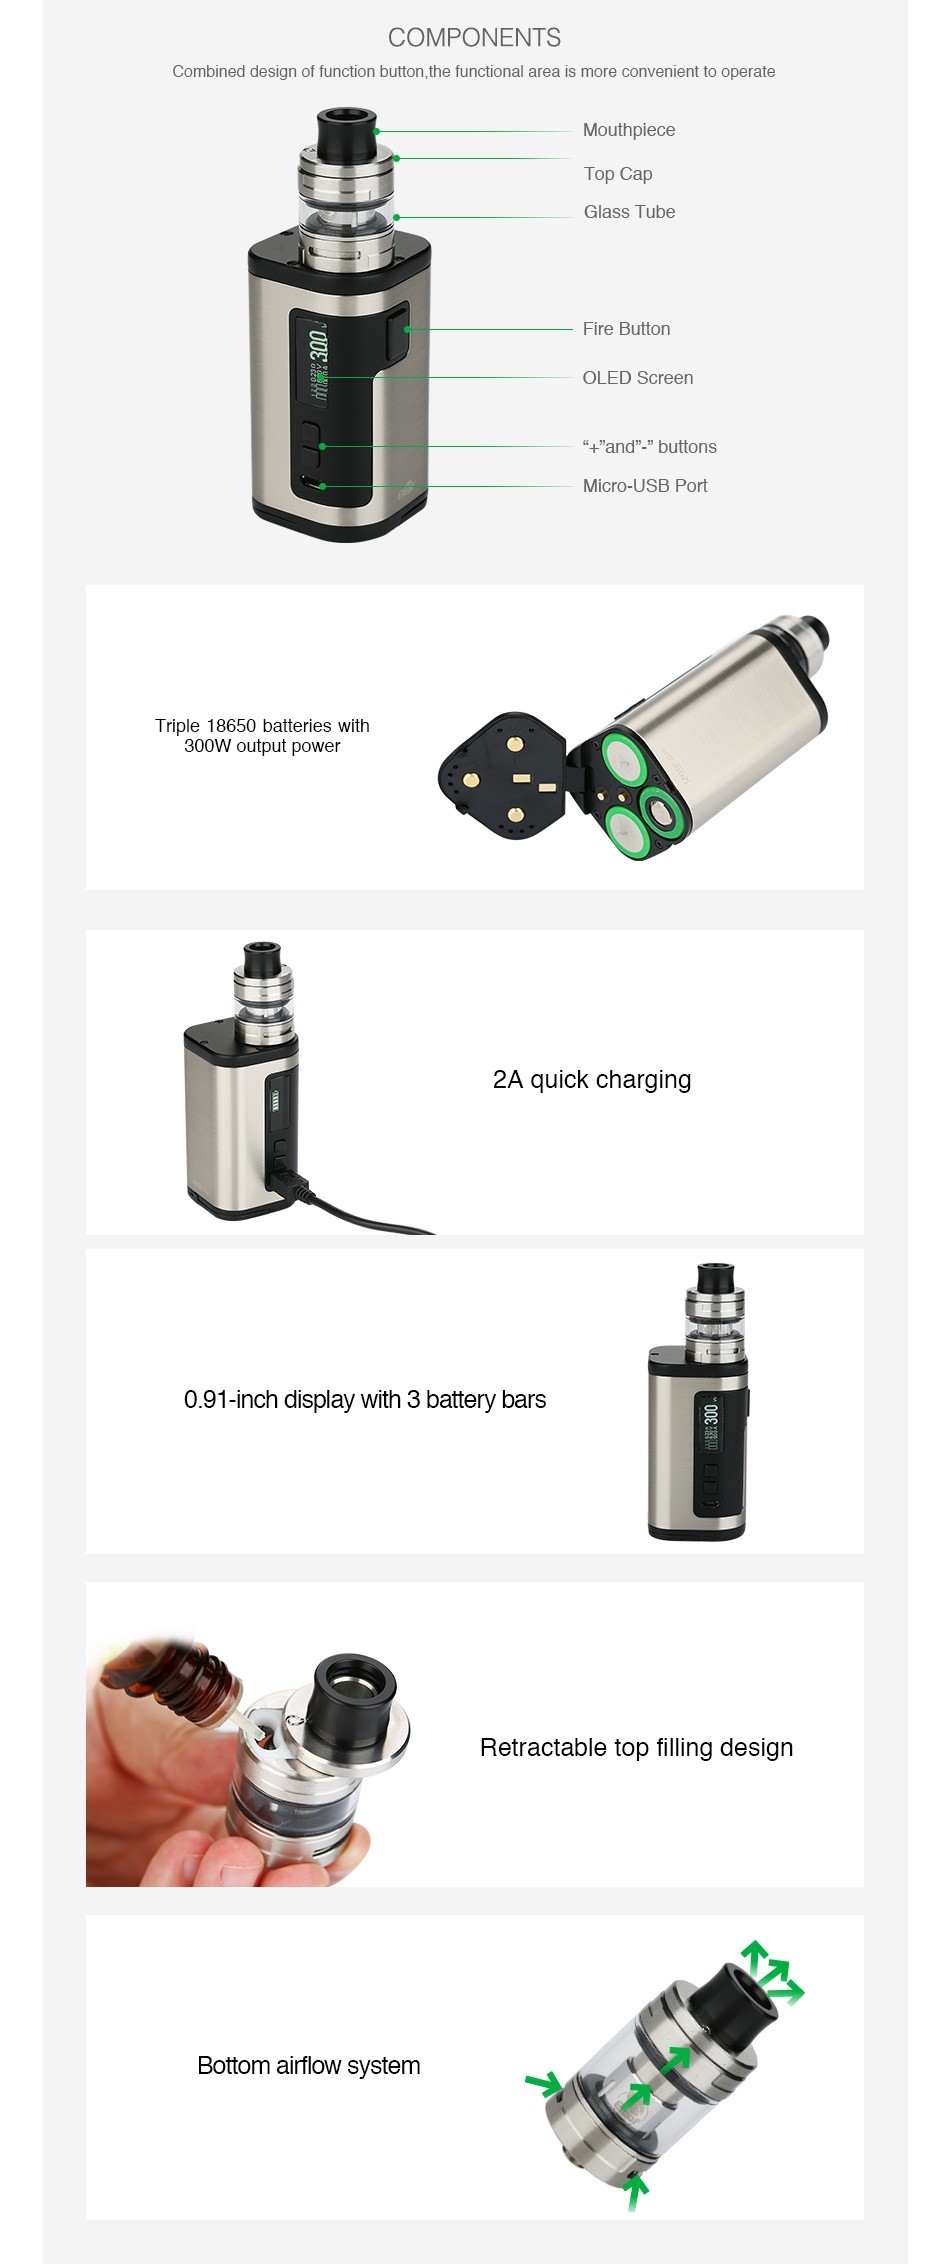 Eleaf iStick Tria 300W Kit with ELLO S COMPONENTS Combined design of function button  the functional area is more convenient to operate Mouthpiece op cap Glass tube Fire Button OLLD Screen  and  buttons Micro USB Purl Triple 18650 batteries with 300W output power 2A quick charging 0 91 inch display with 3 battery bars Retractable top filling design Bottom airflow system